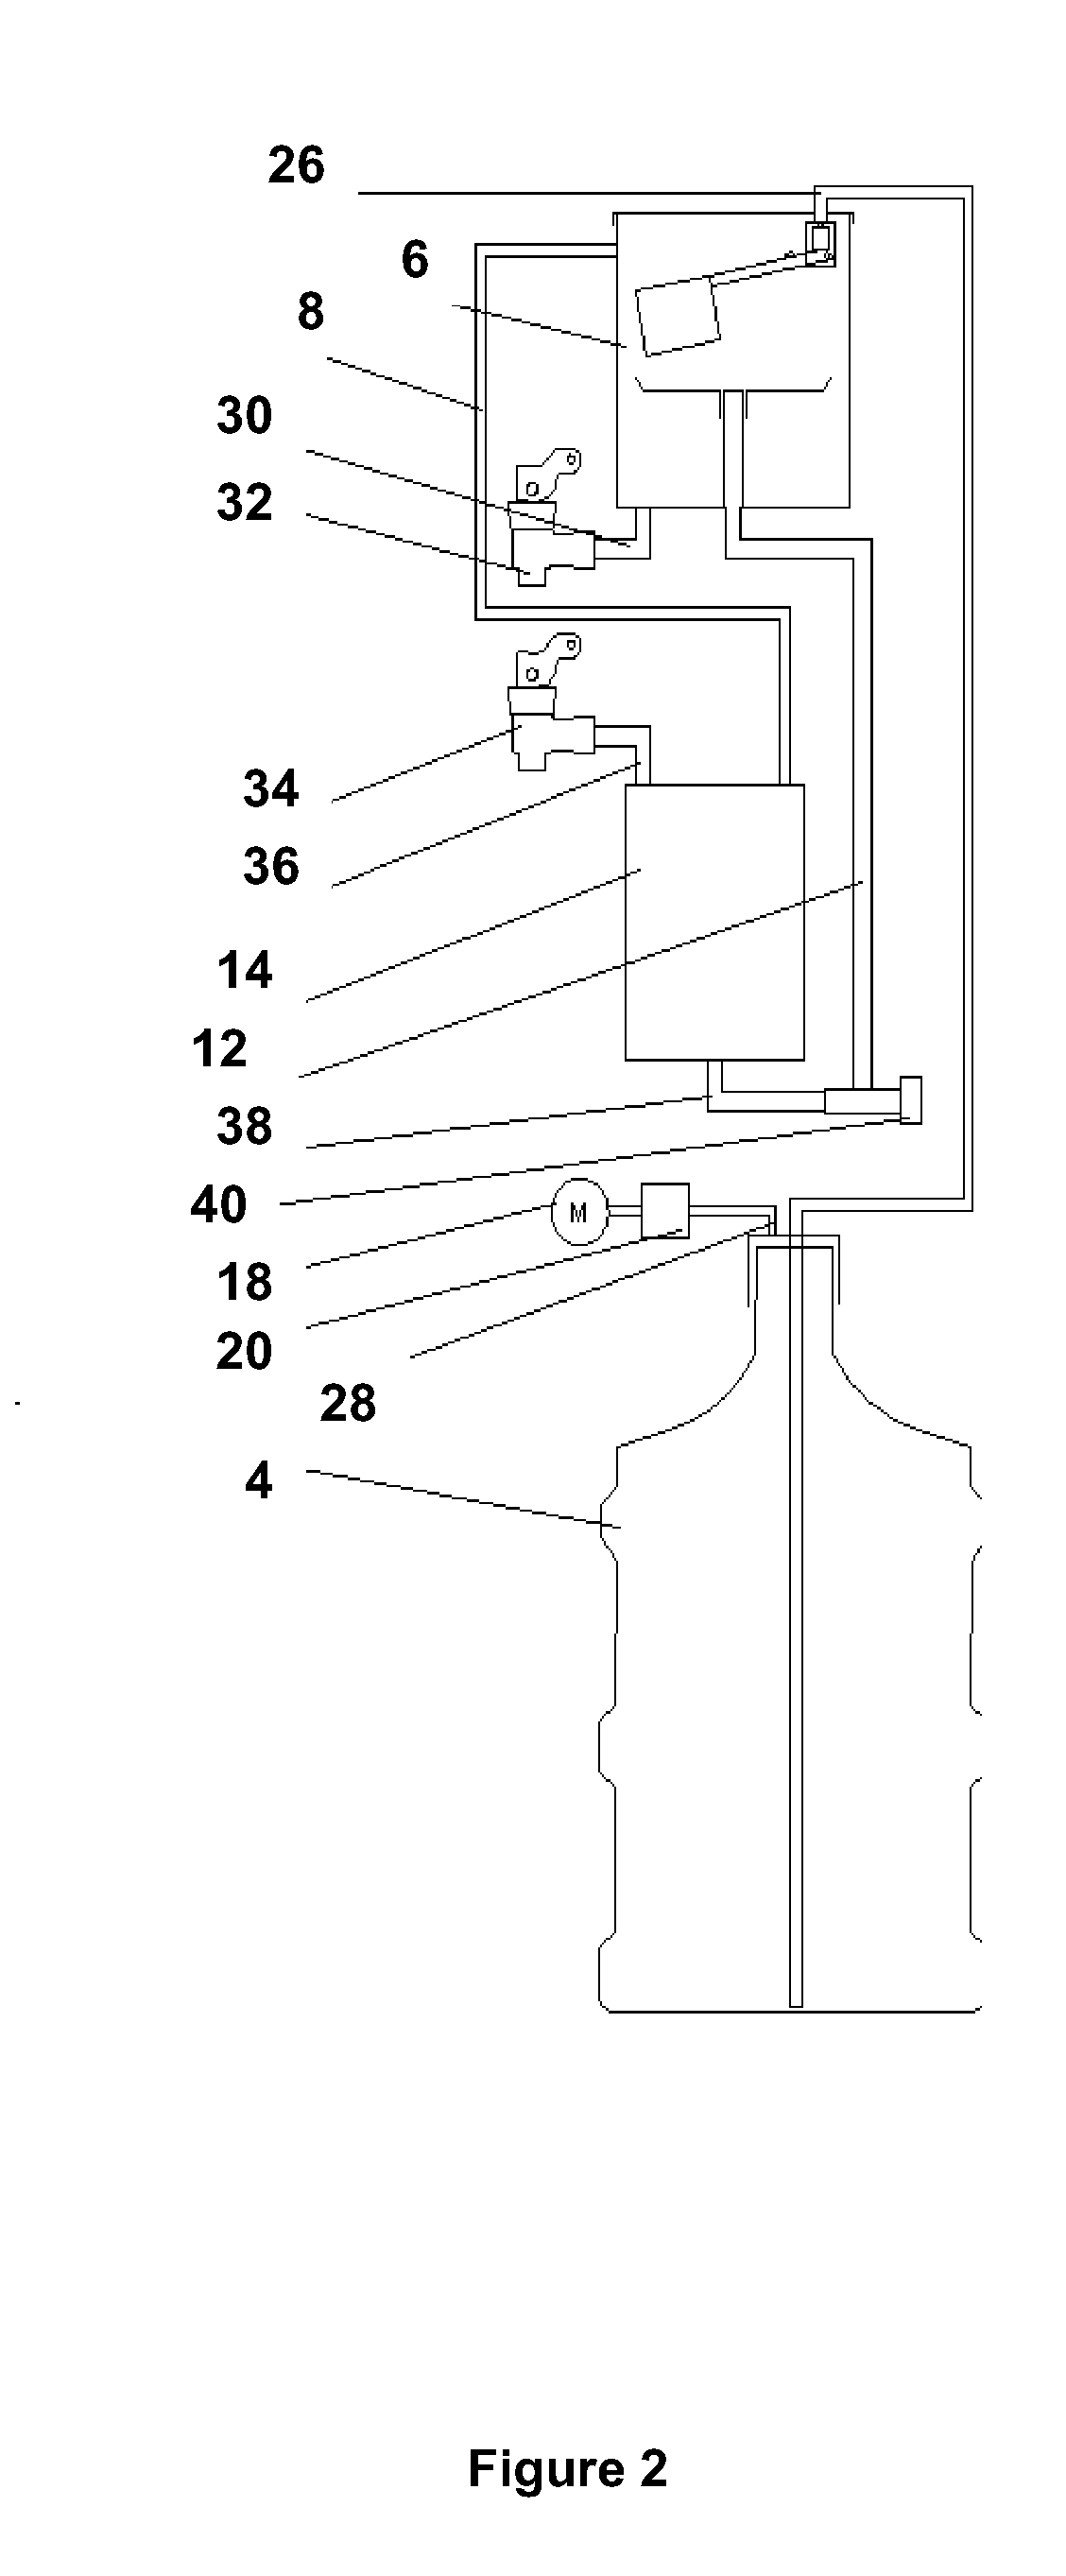 Bottom-loading water coolers with ozone sterilizing devices